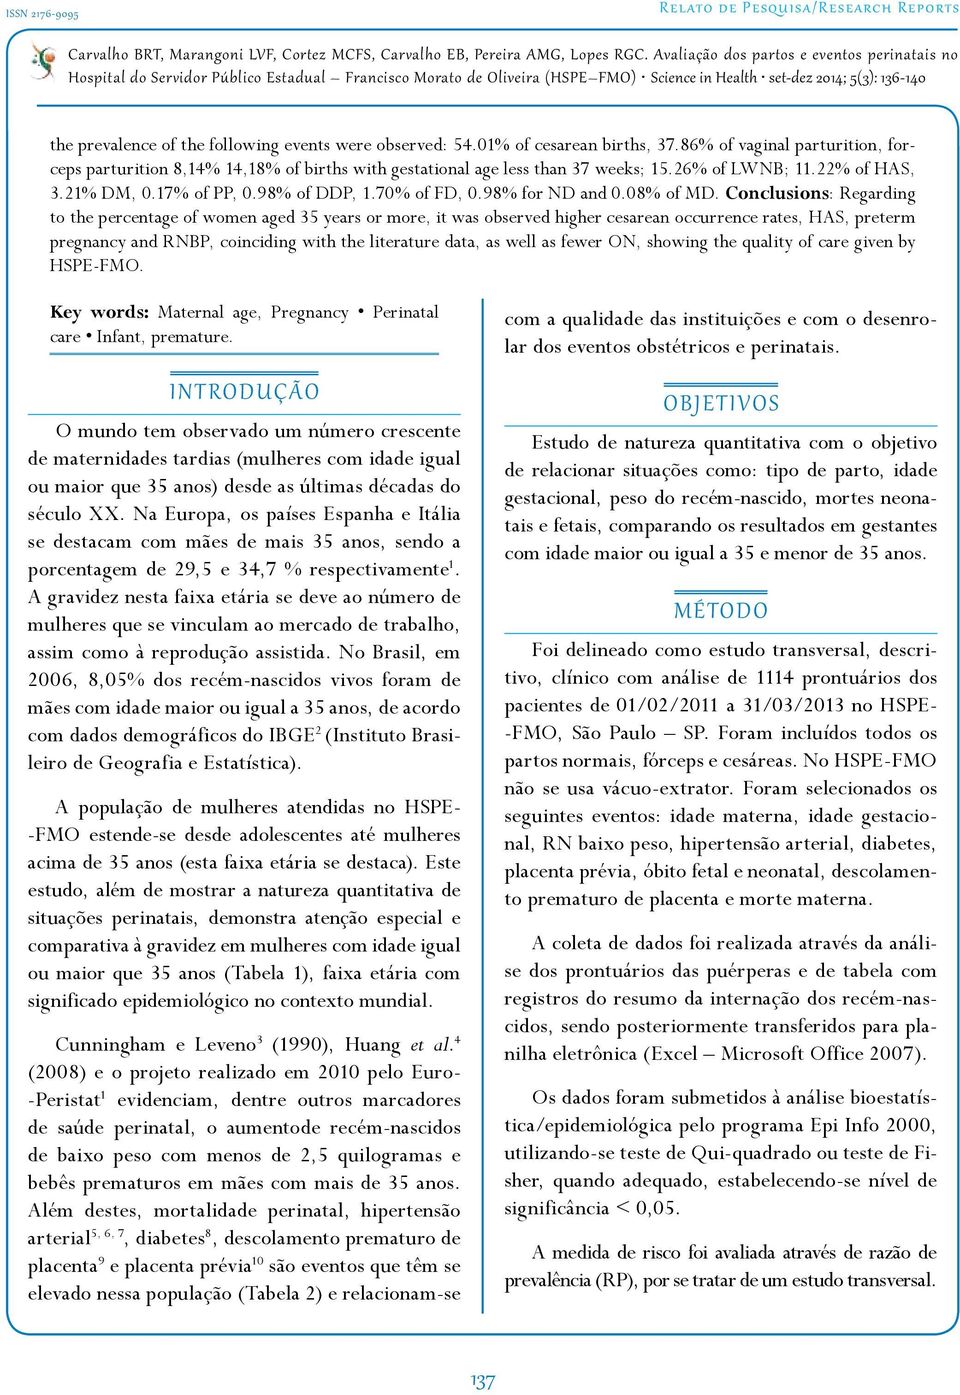 Conclusions: Regarding to the percentage of women aged 35 years or more, it was observed higher cesarean occurrence rates, HAS, preterm pregnancy and RNBP, coinciding with the literature data, as